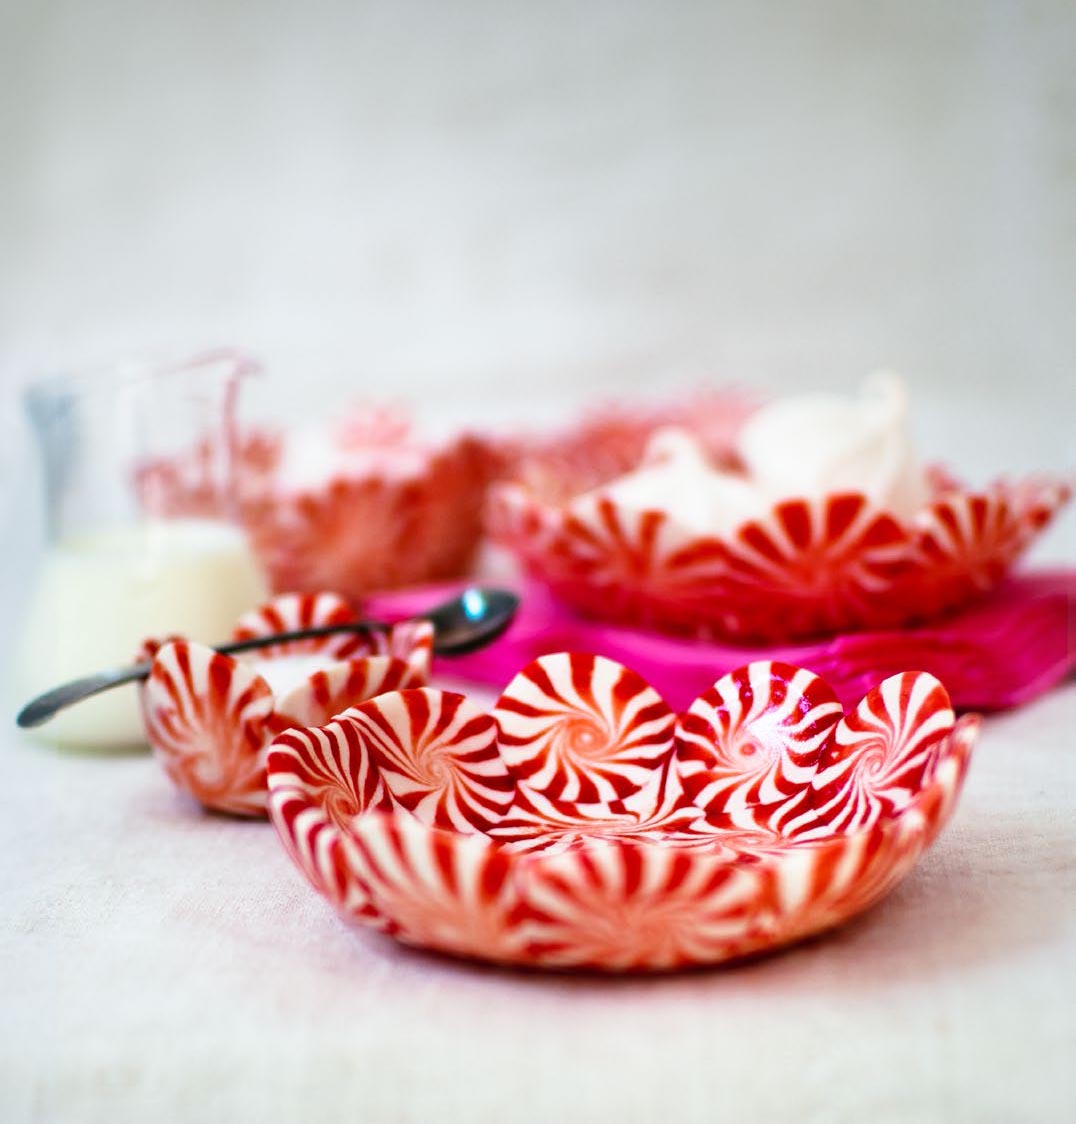 DIY Peppermint Candy Bowls from Candy Aisle Crafts | Design*Sponge